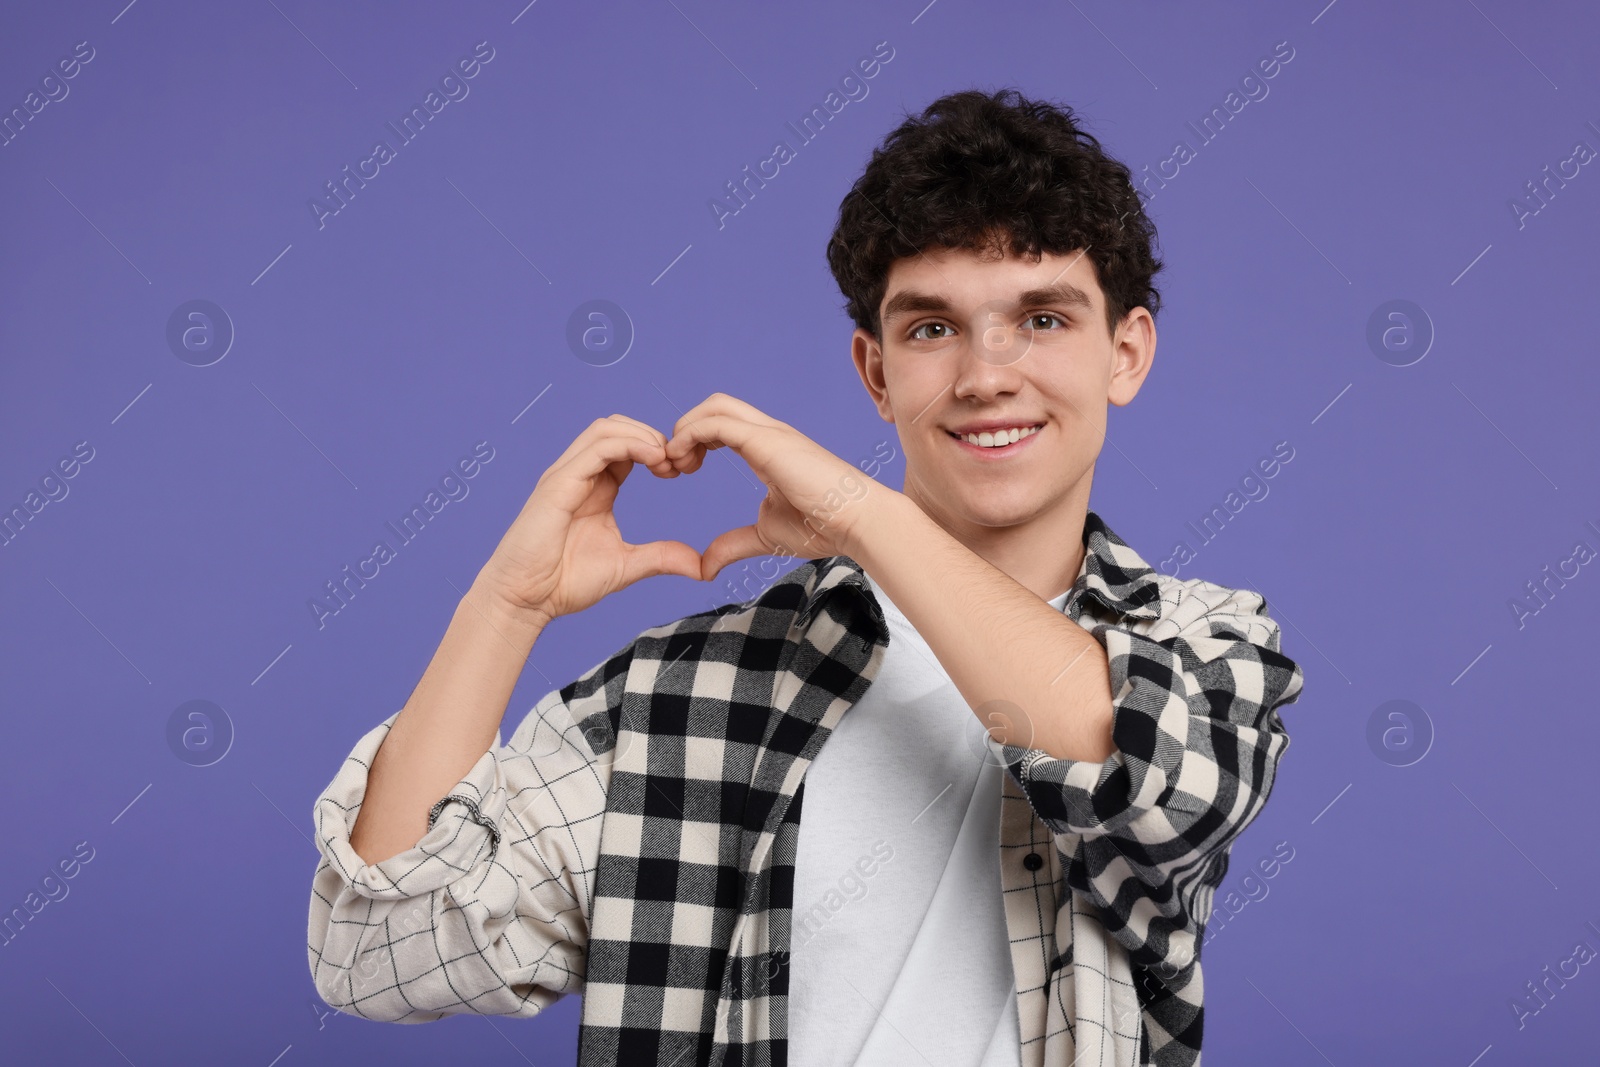 Photo of Happy young man showing heart gesture with hands on purple background